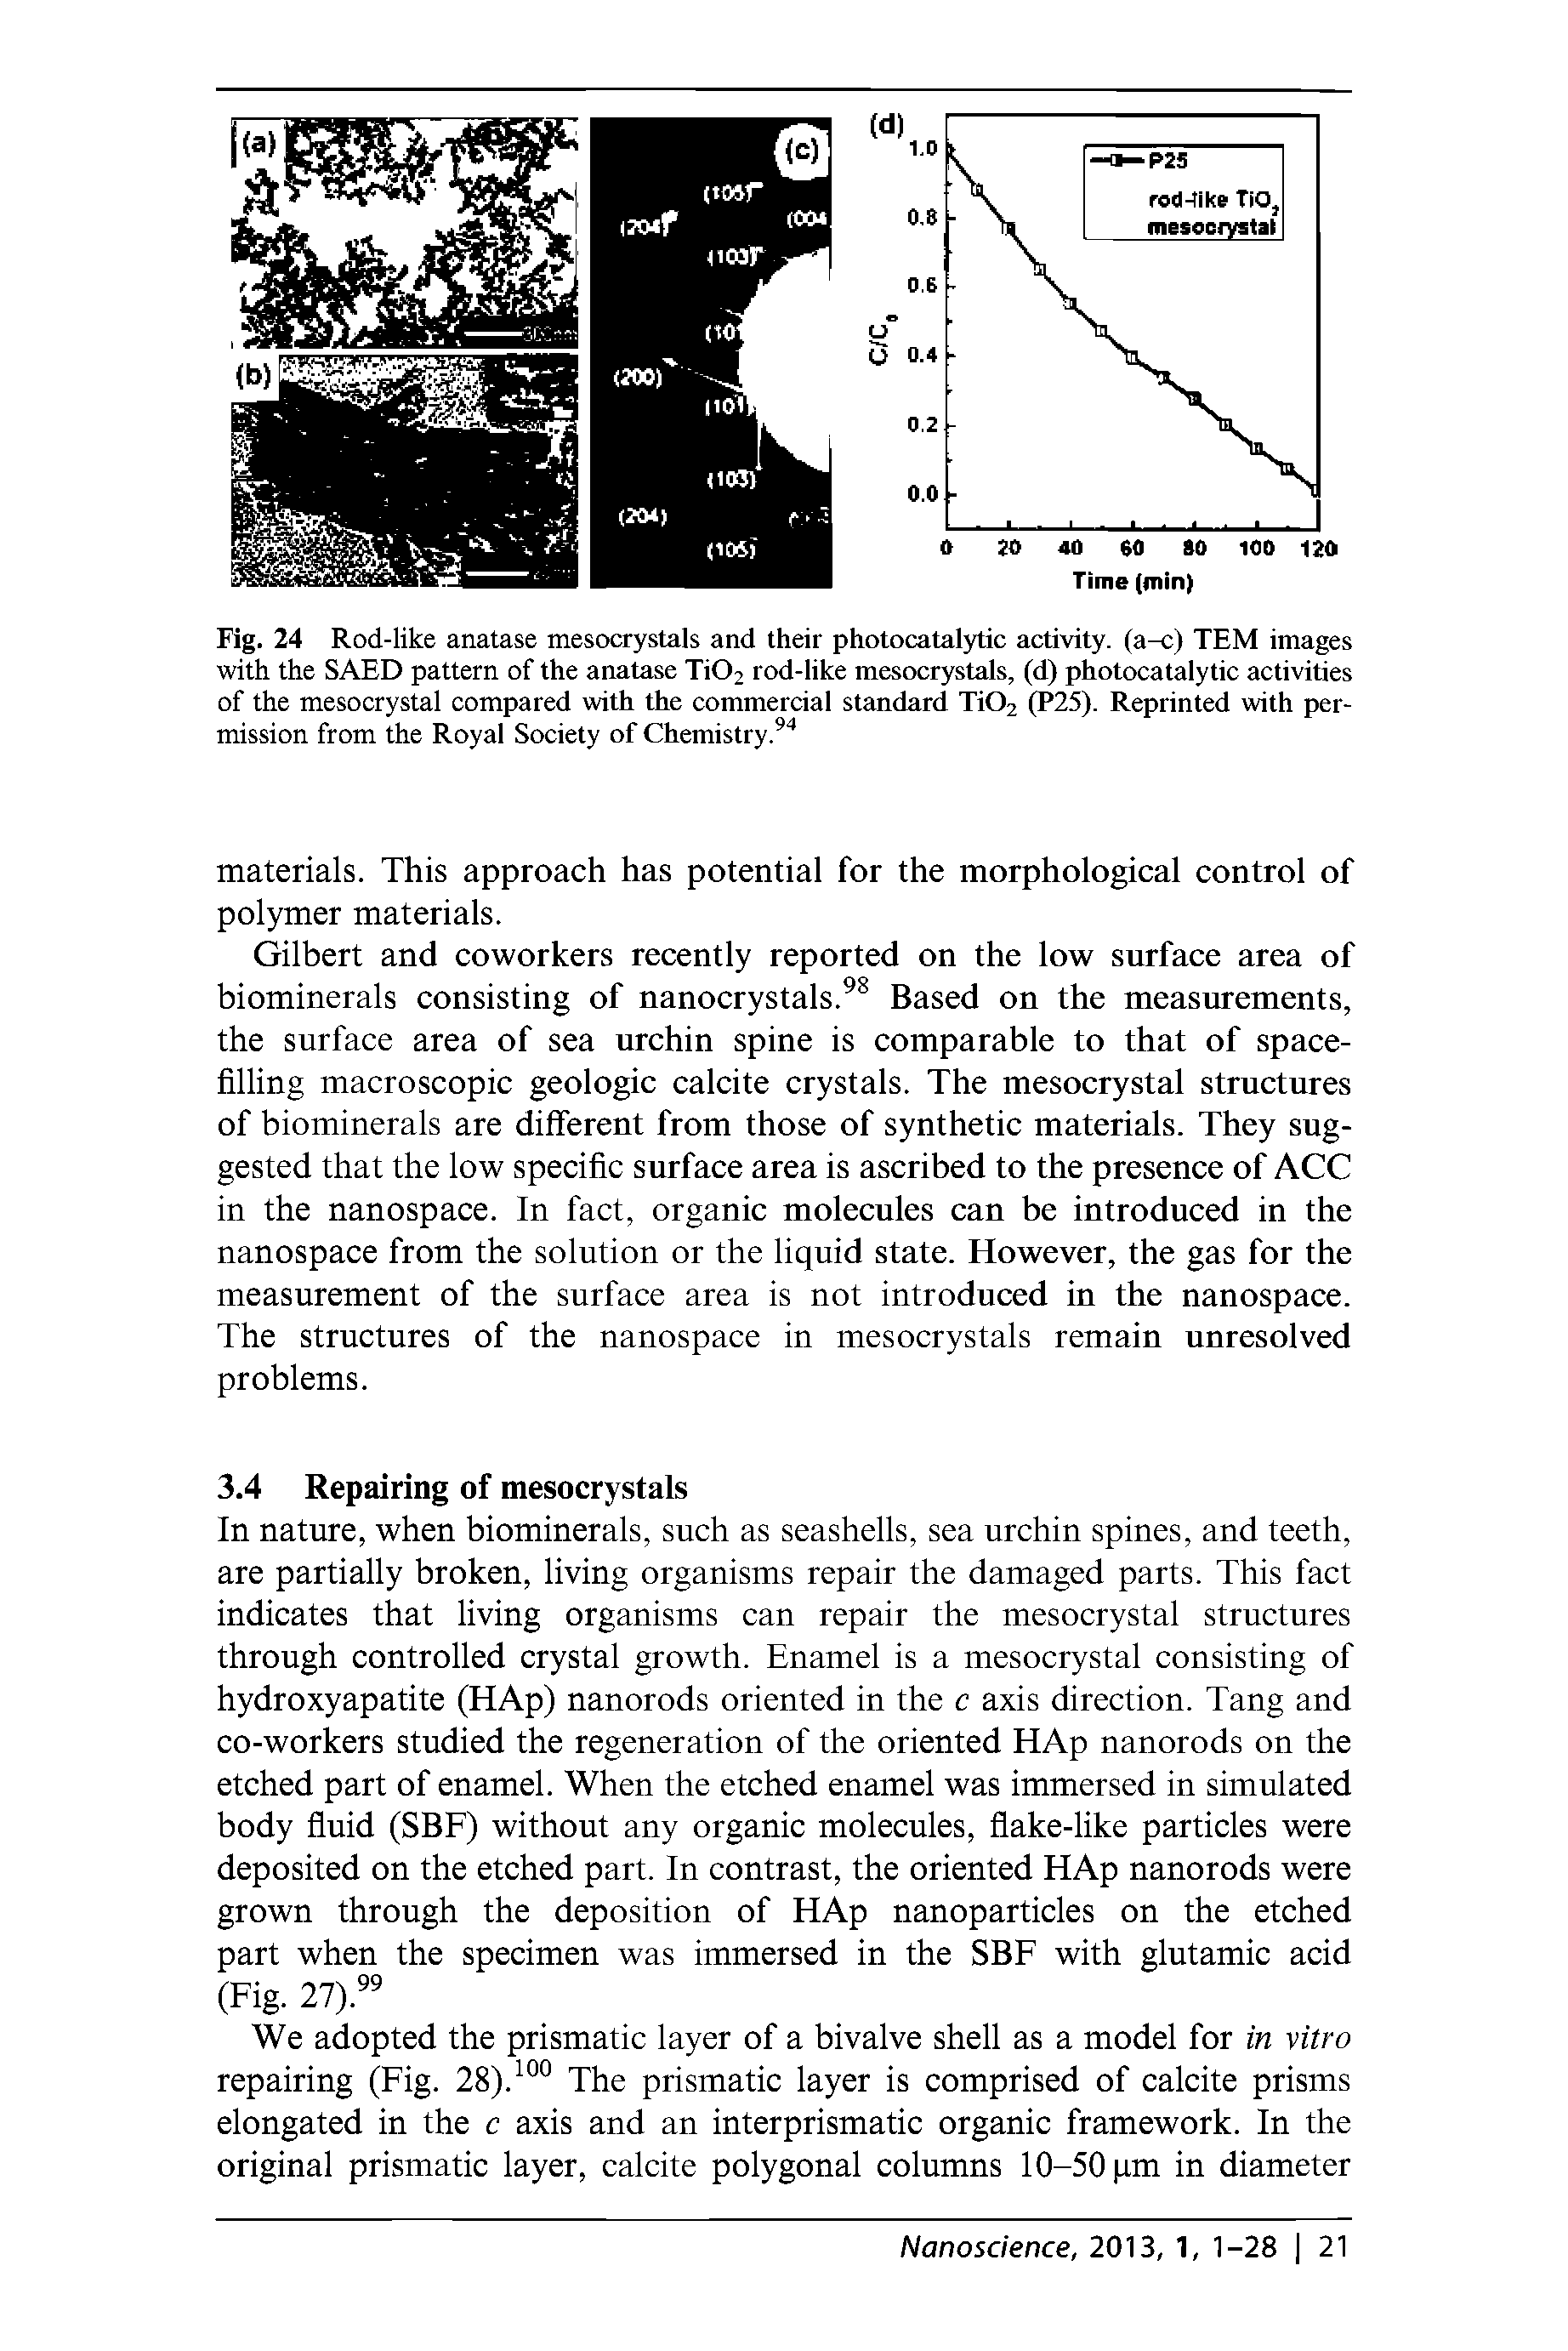 Fig. 24 Rod-like anatase mesocrystals and their photocatalytic activity, (a-c) TEM images with the SAED pattern of the anatase Ti02 rod-like mesocrystals, (d) photocatalytic activities of the mesocrystal compared with the commercial standard Xi02 (P25). Reprinted with permission from the Royal Society of Chemistry...